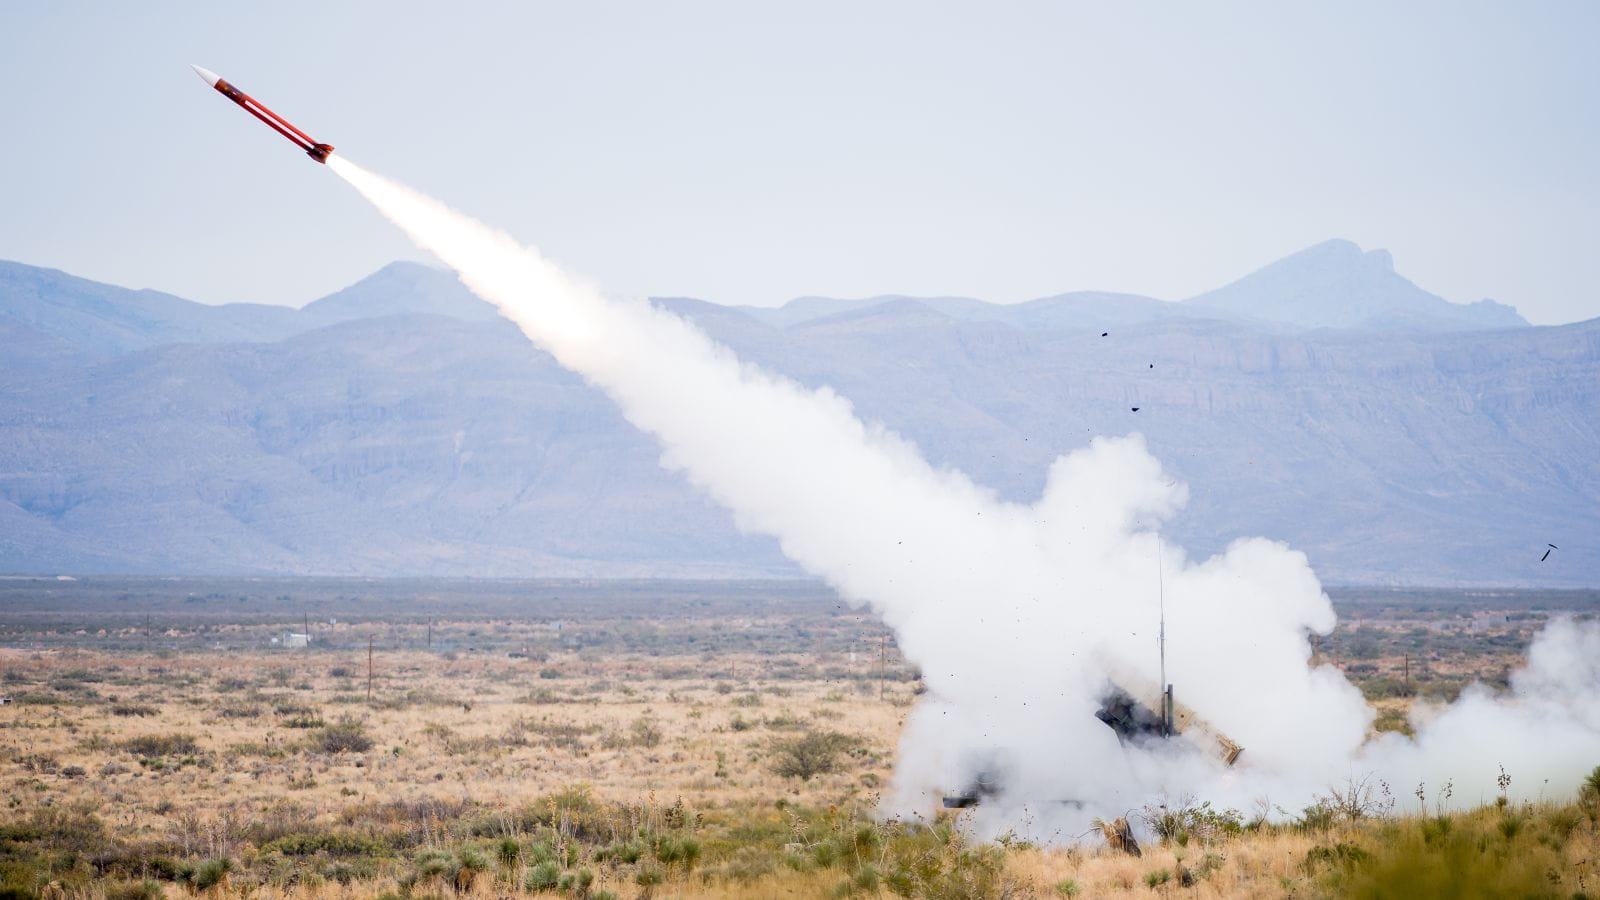 The Patriot launcher fires a missile during a test.